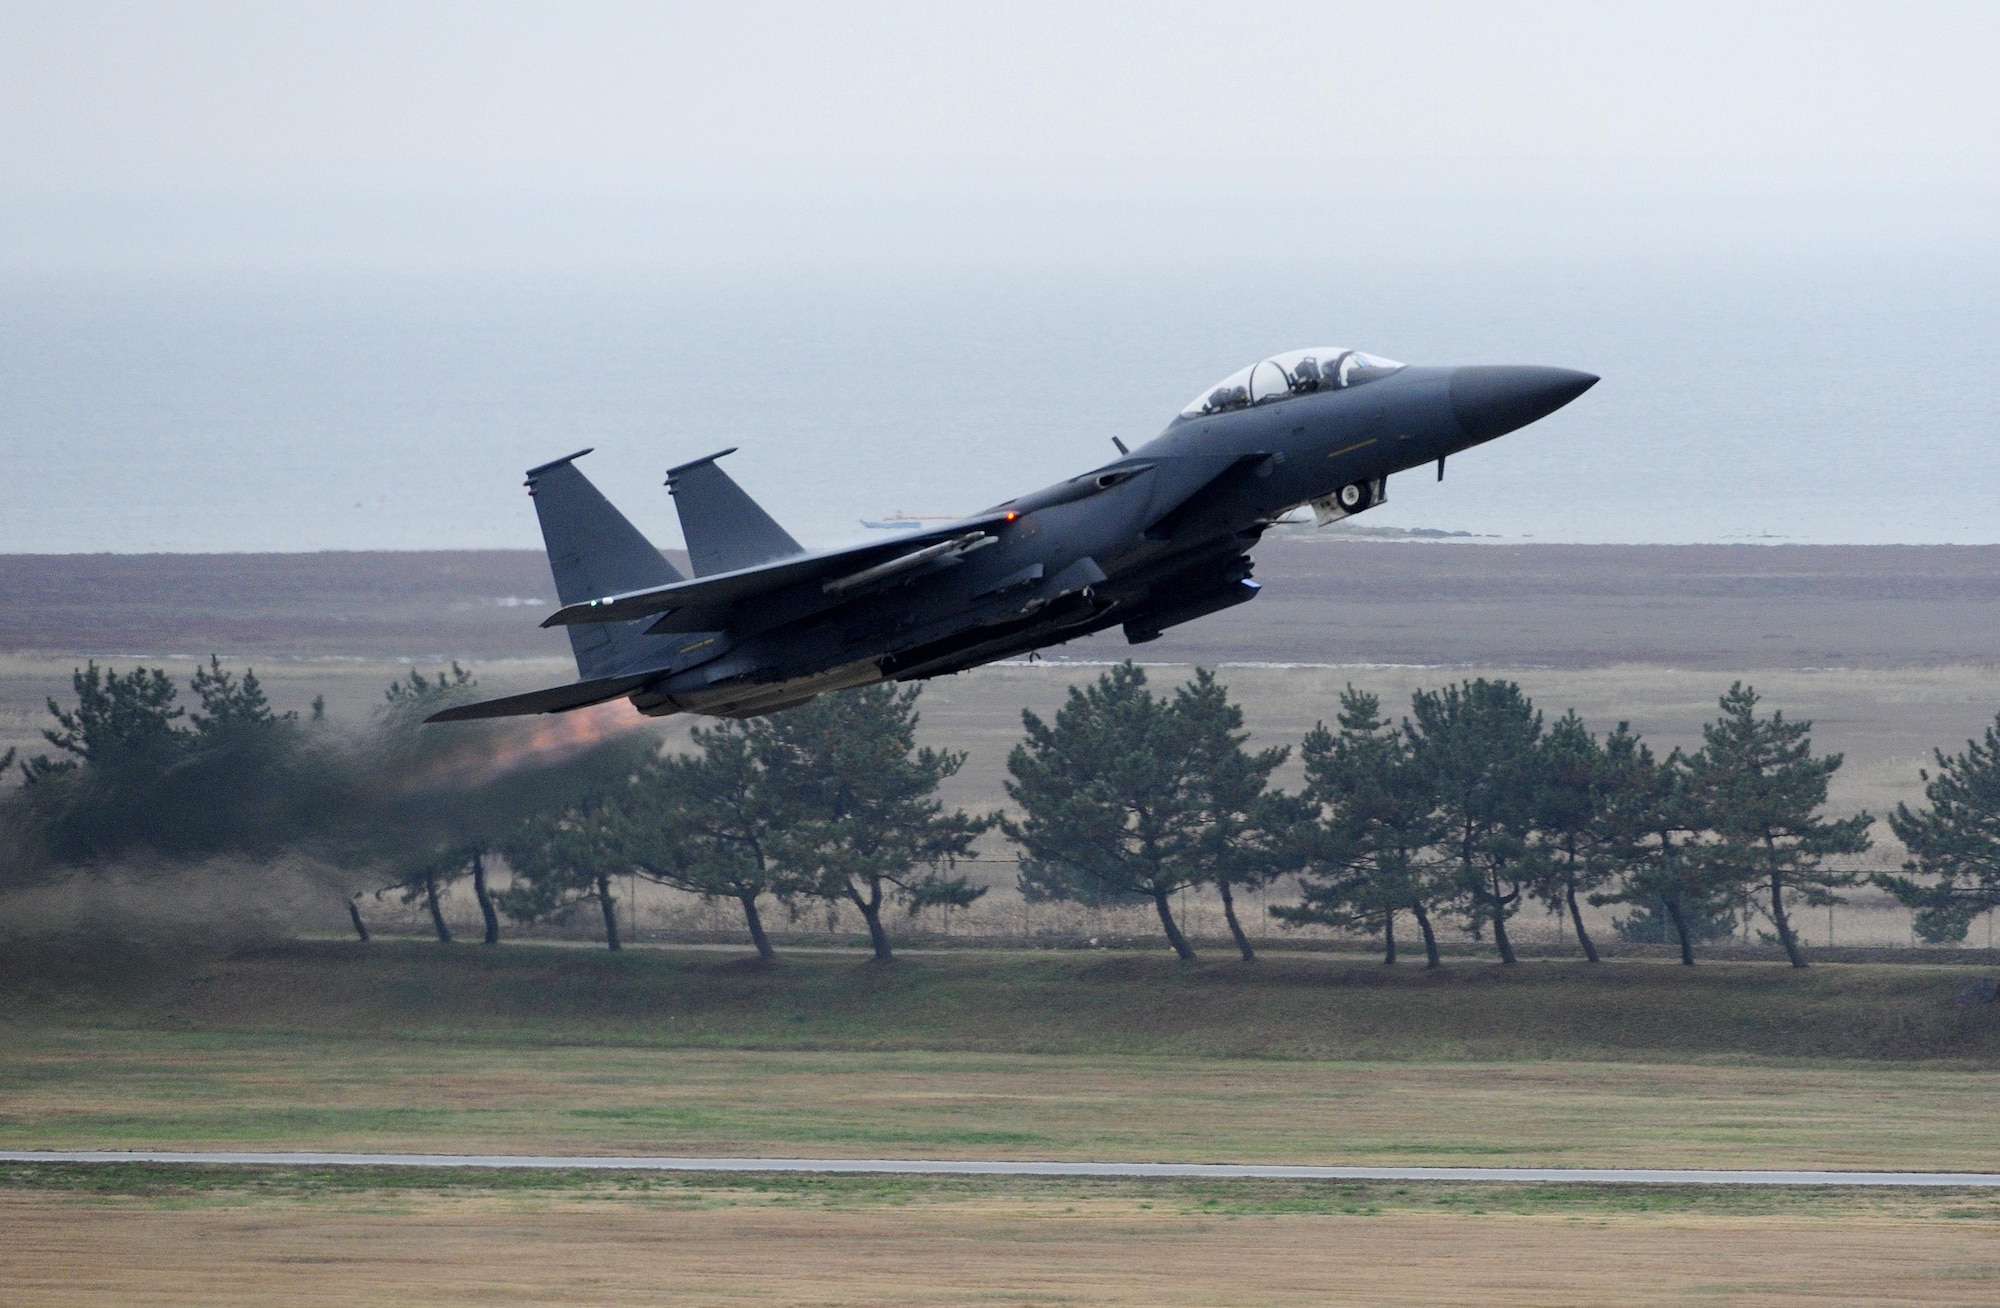 An F-15K Slam Eagle from the 11th Fighter Wing, Daegu Air Base, Republic of Korea, takes off of the runway during Buddy Wing 15-7 at Kunsan Air Base, Republic of Korea, Nov. 16, 2015. Buddy Wing is part of a bilateral fighter exchange program designed to improve interoperability between U.S. Air Force and ROKAF fighter squadrons and are conducted multiple times throughout the year in order to promote cultural awareness and sharpen combined combat capabilities. (U.S. Air Force photo by Staff Sgt. Nick Wilson/Released)